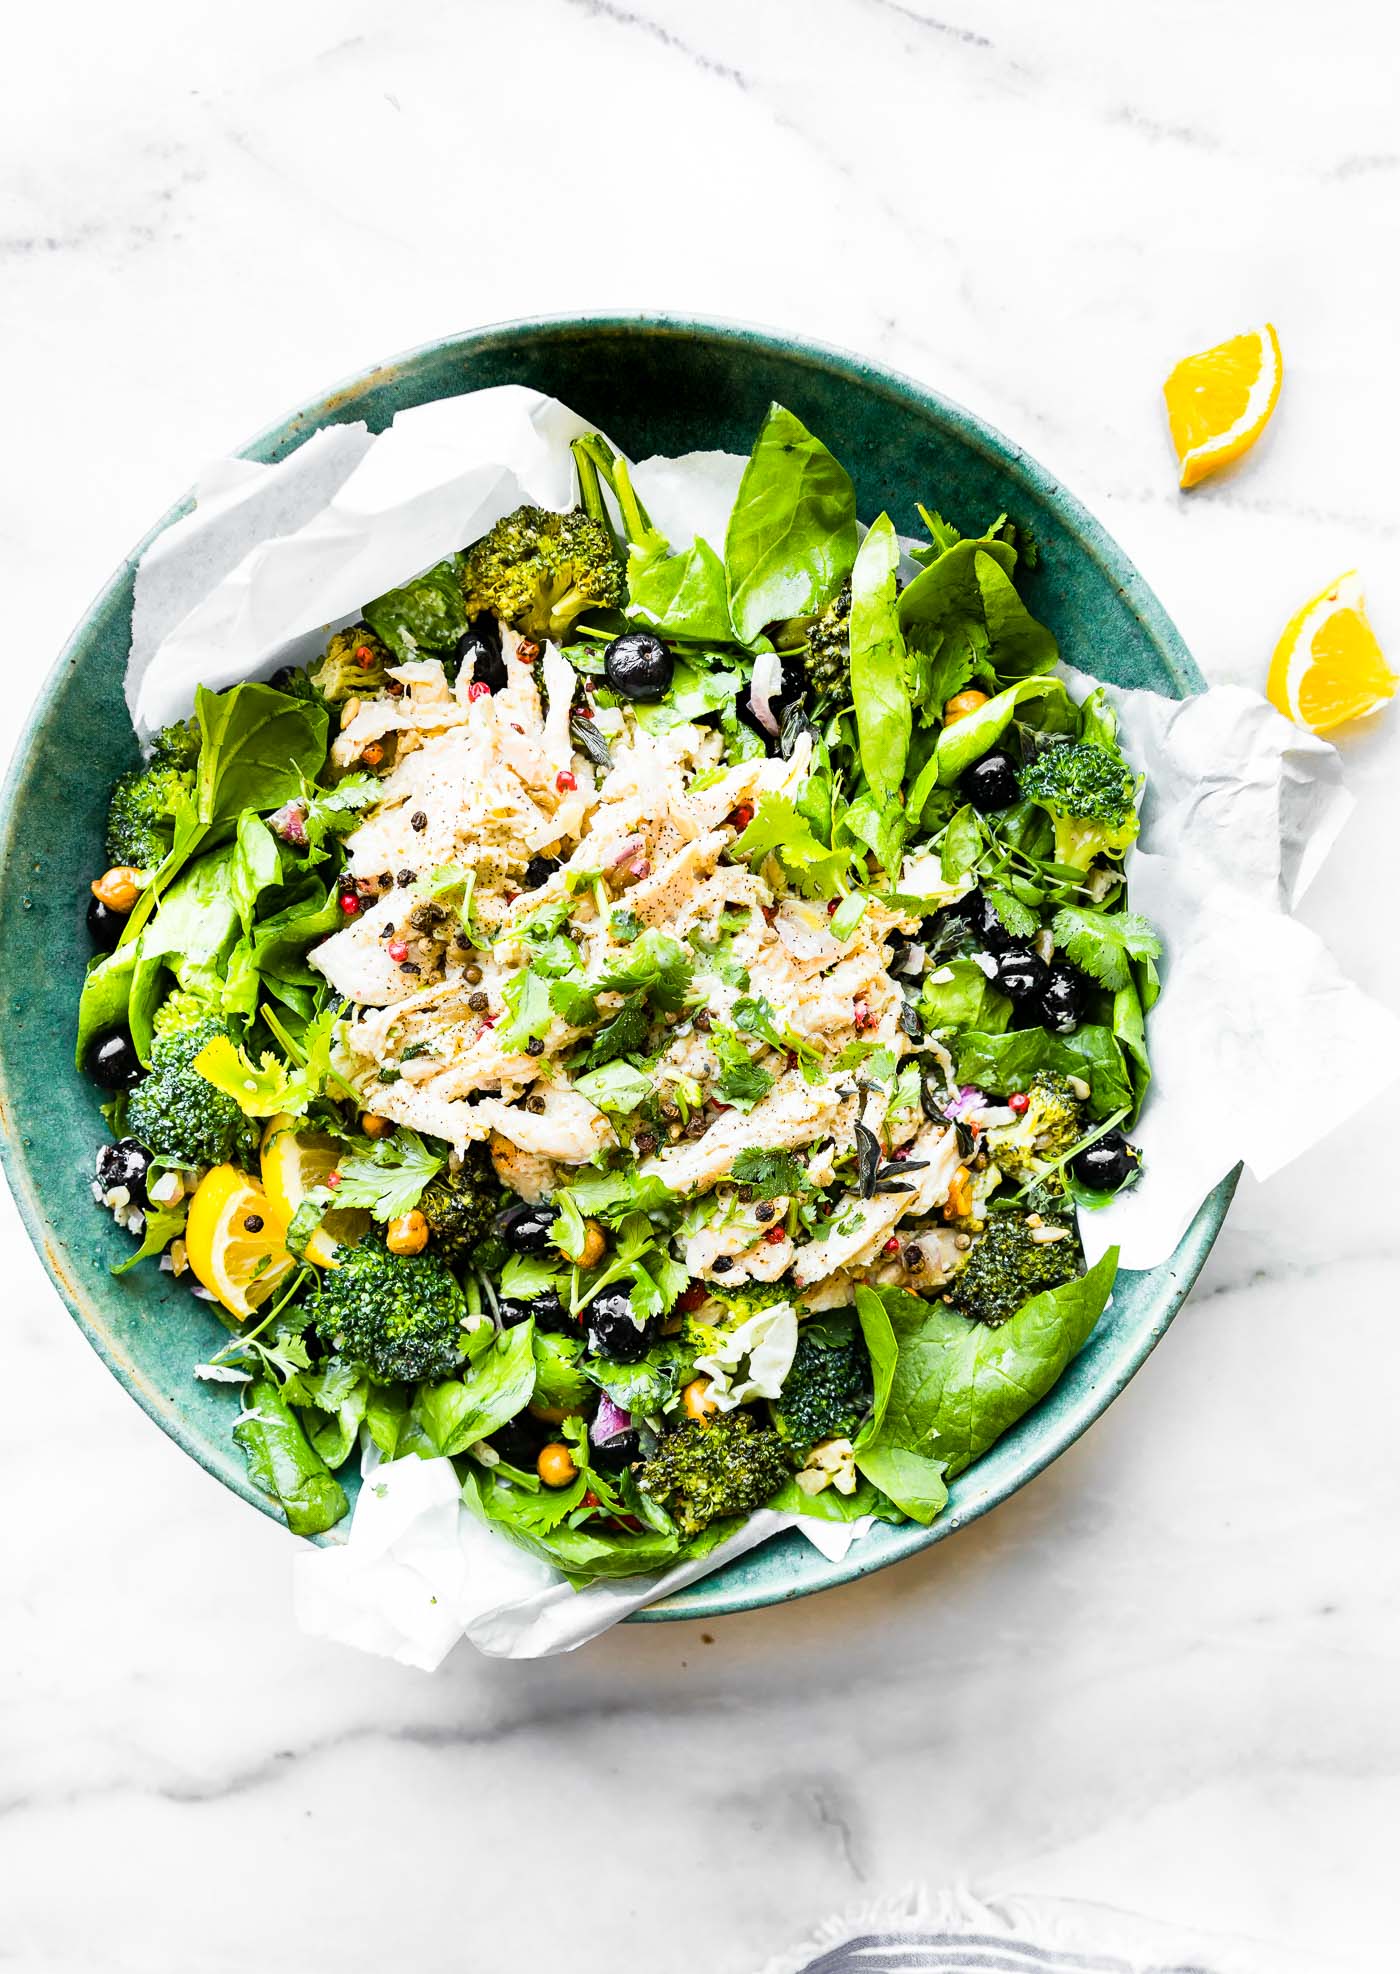 Overhead view turquoise bowl filled with chicken salad over mixed greens and broccoli.